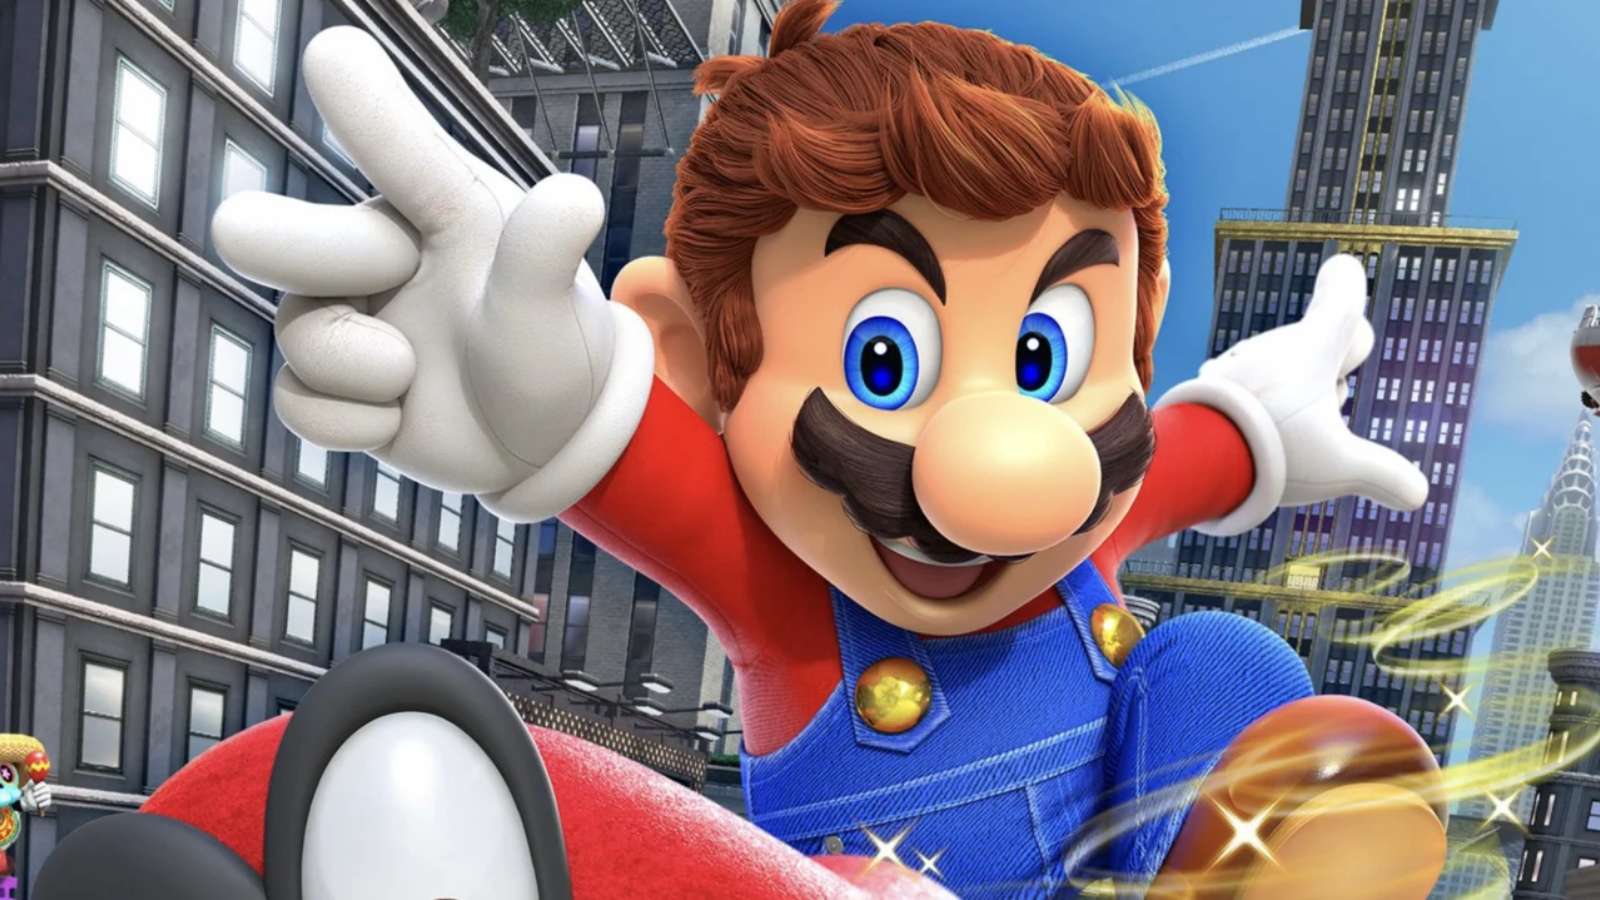 Mario on the cover of Super Mario Odyssey